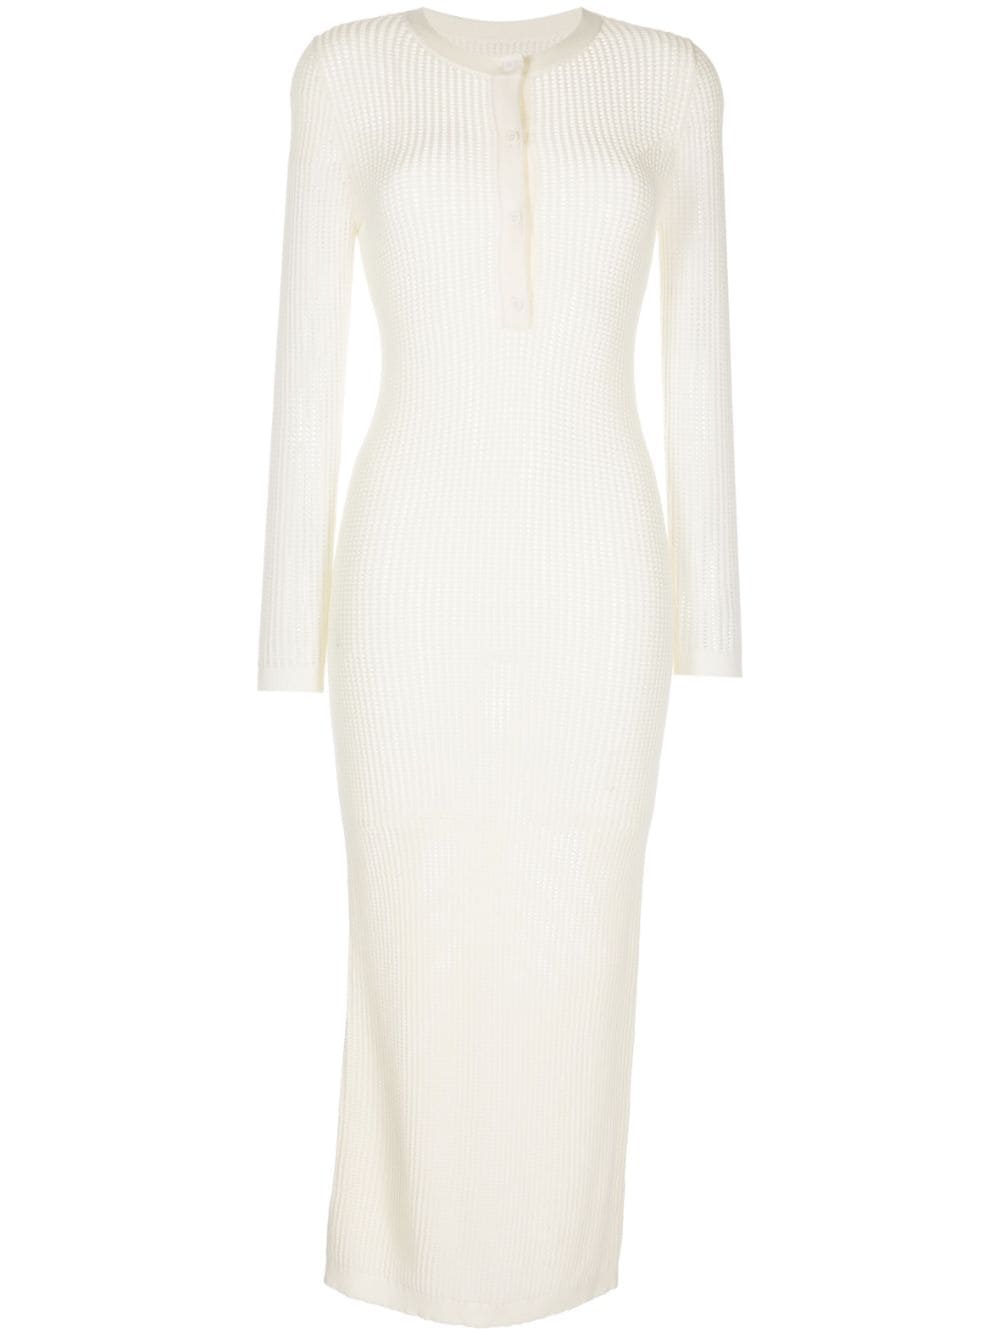 Cynthia Rowley Henley knitted long-sleeve dress - White